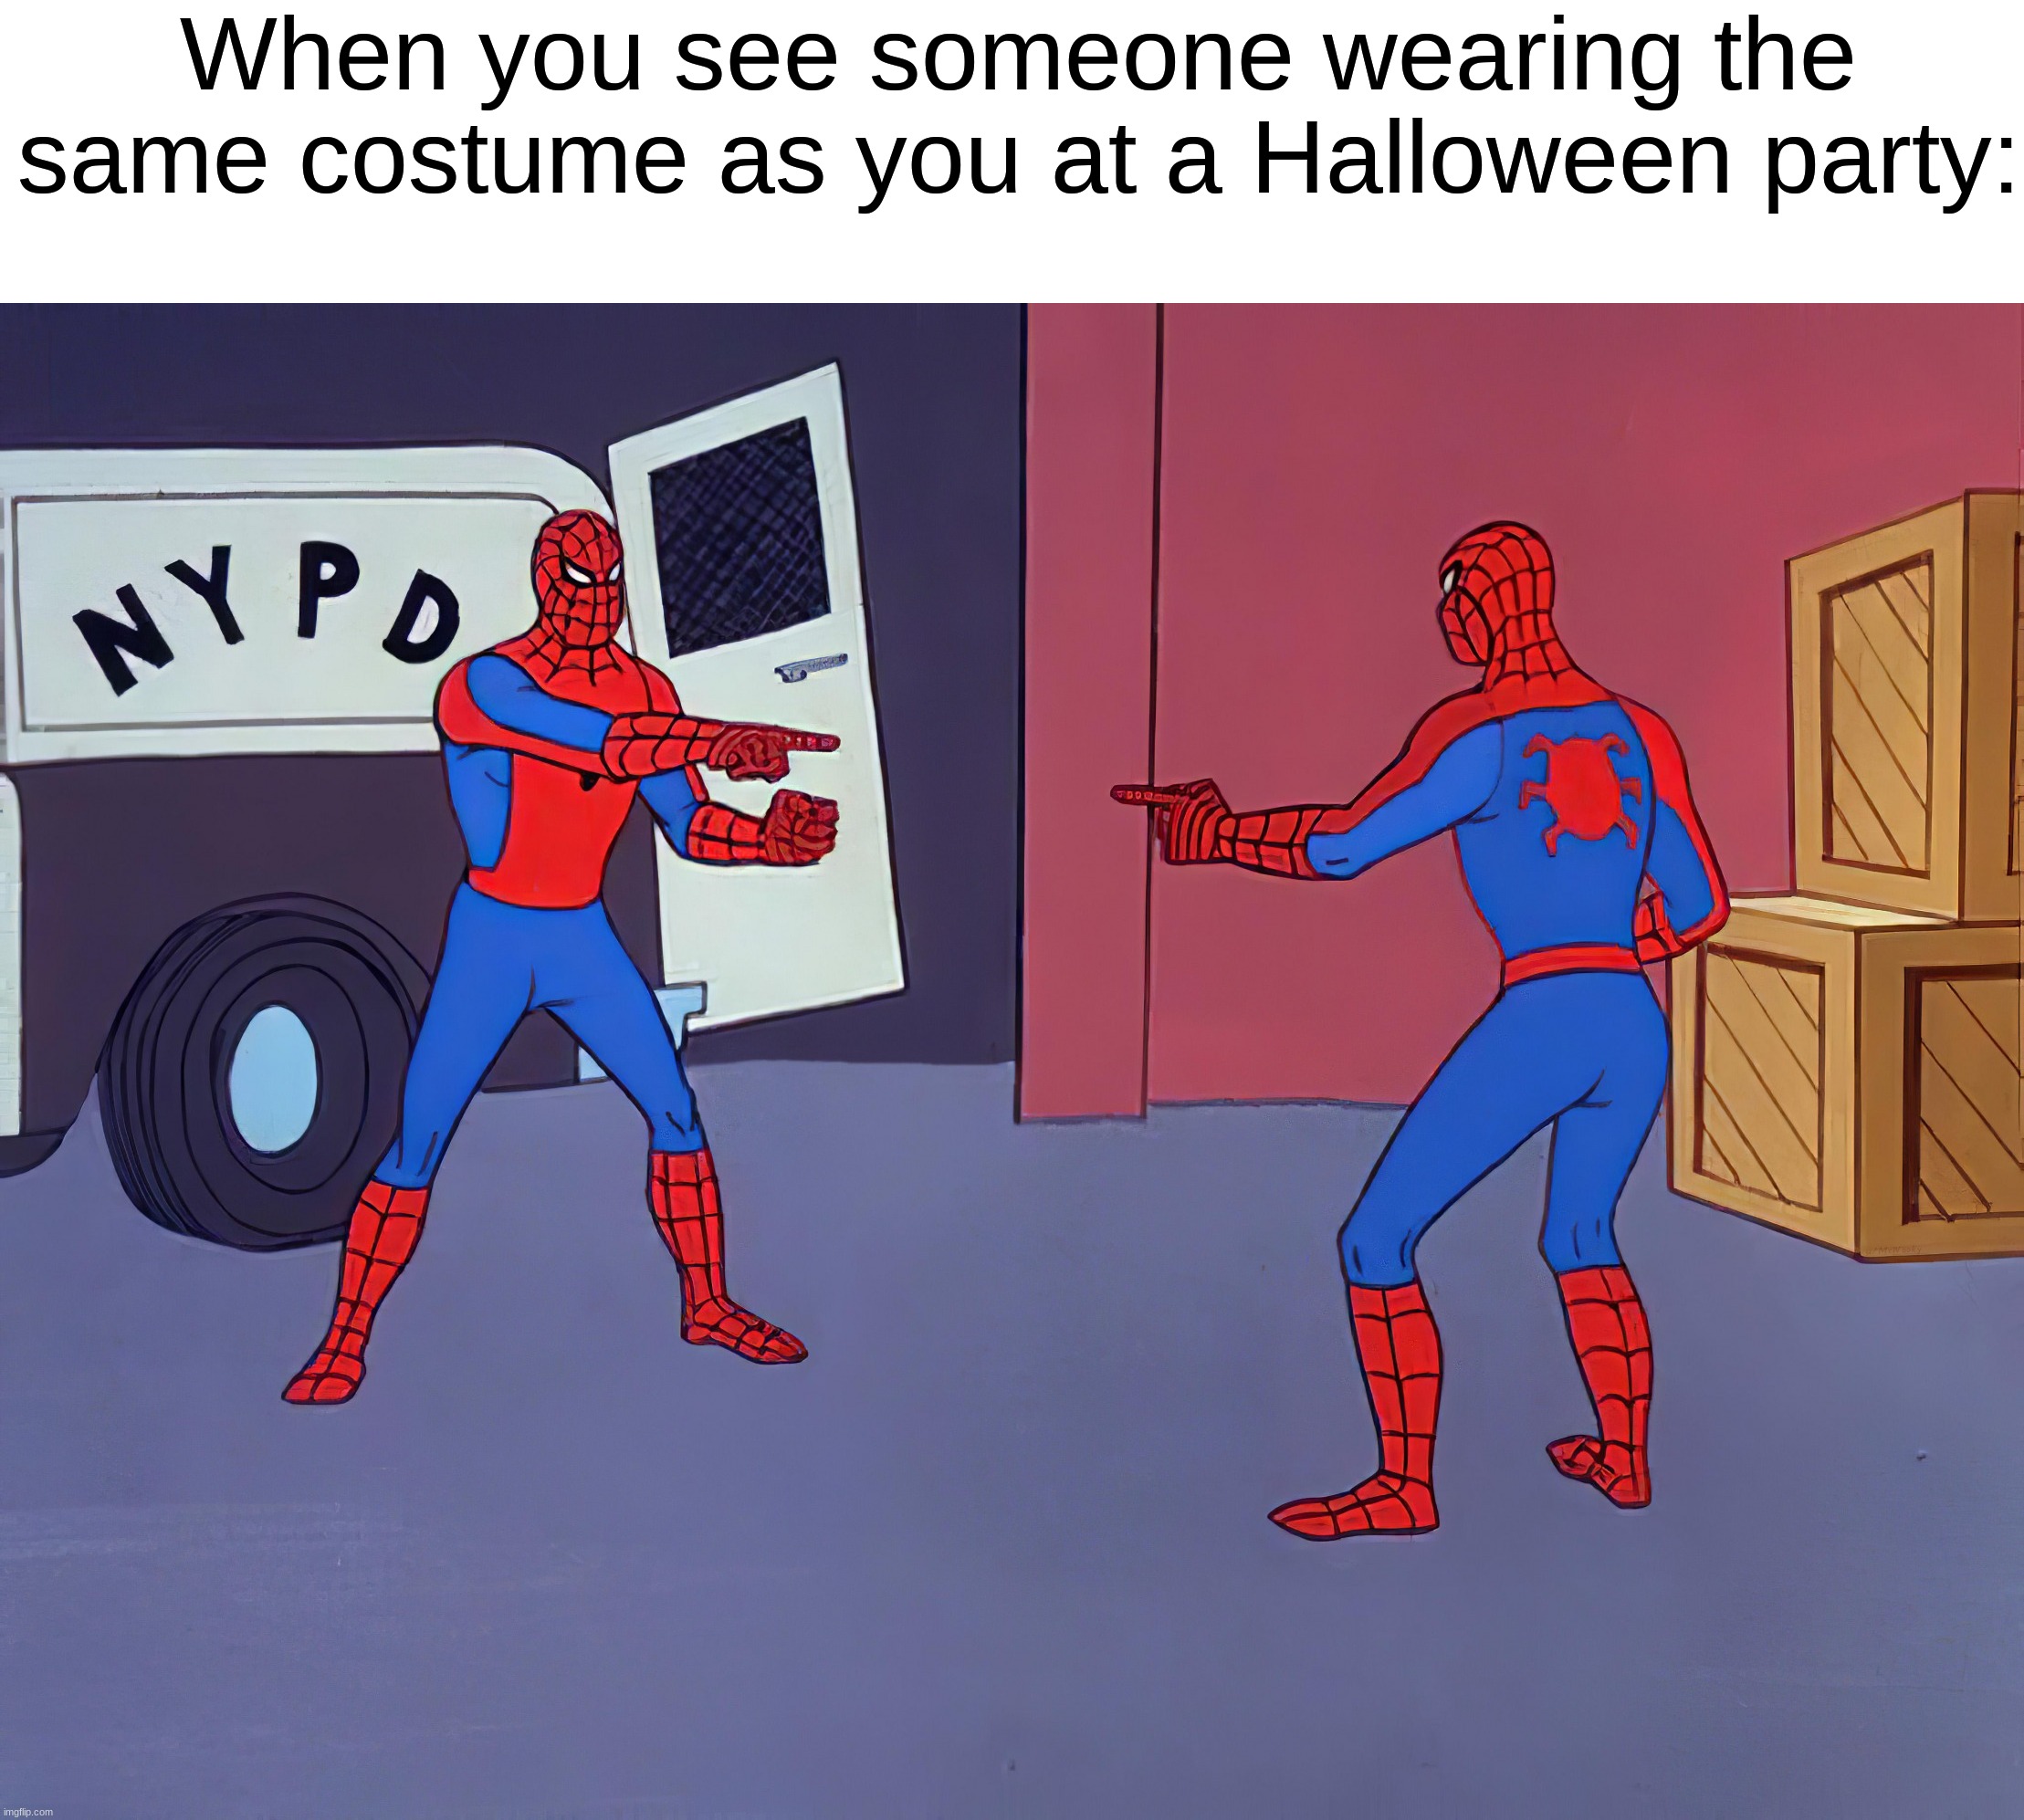 Hey!.... you have the same thing as me! | When you see someone wearing the same costume as you at a Halloween party: | image tagged in two spidermen pointing at each other,memes,funny,halloween,spooky month,halloween costume | made w/ Imgflip meme maker